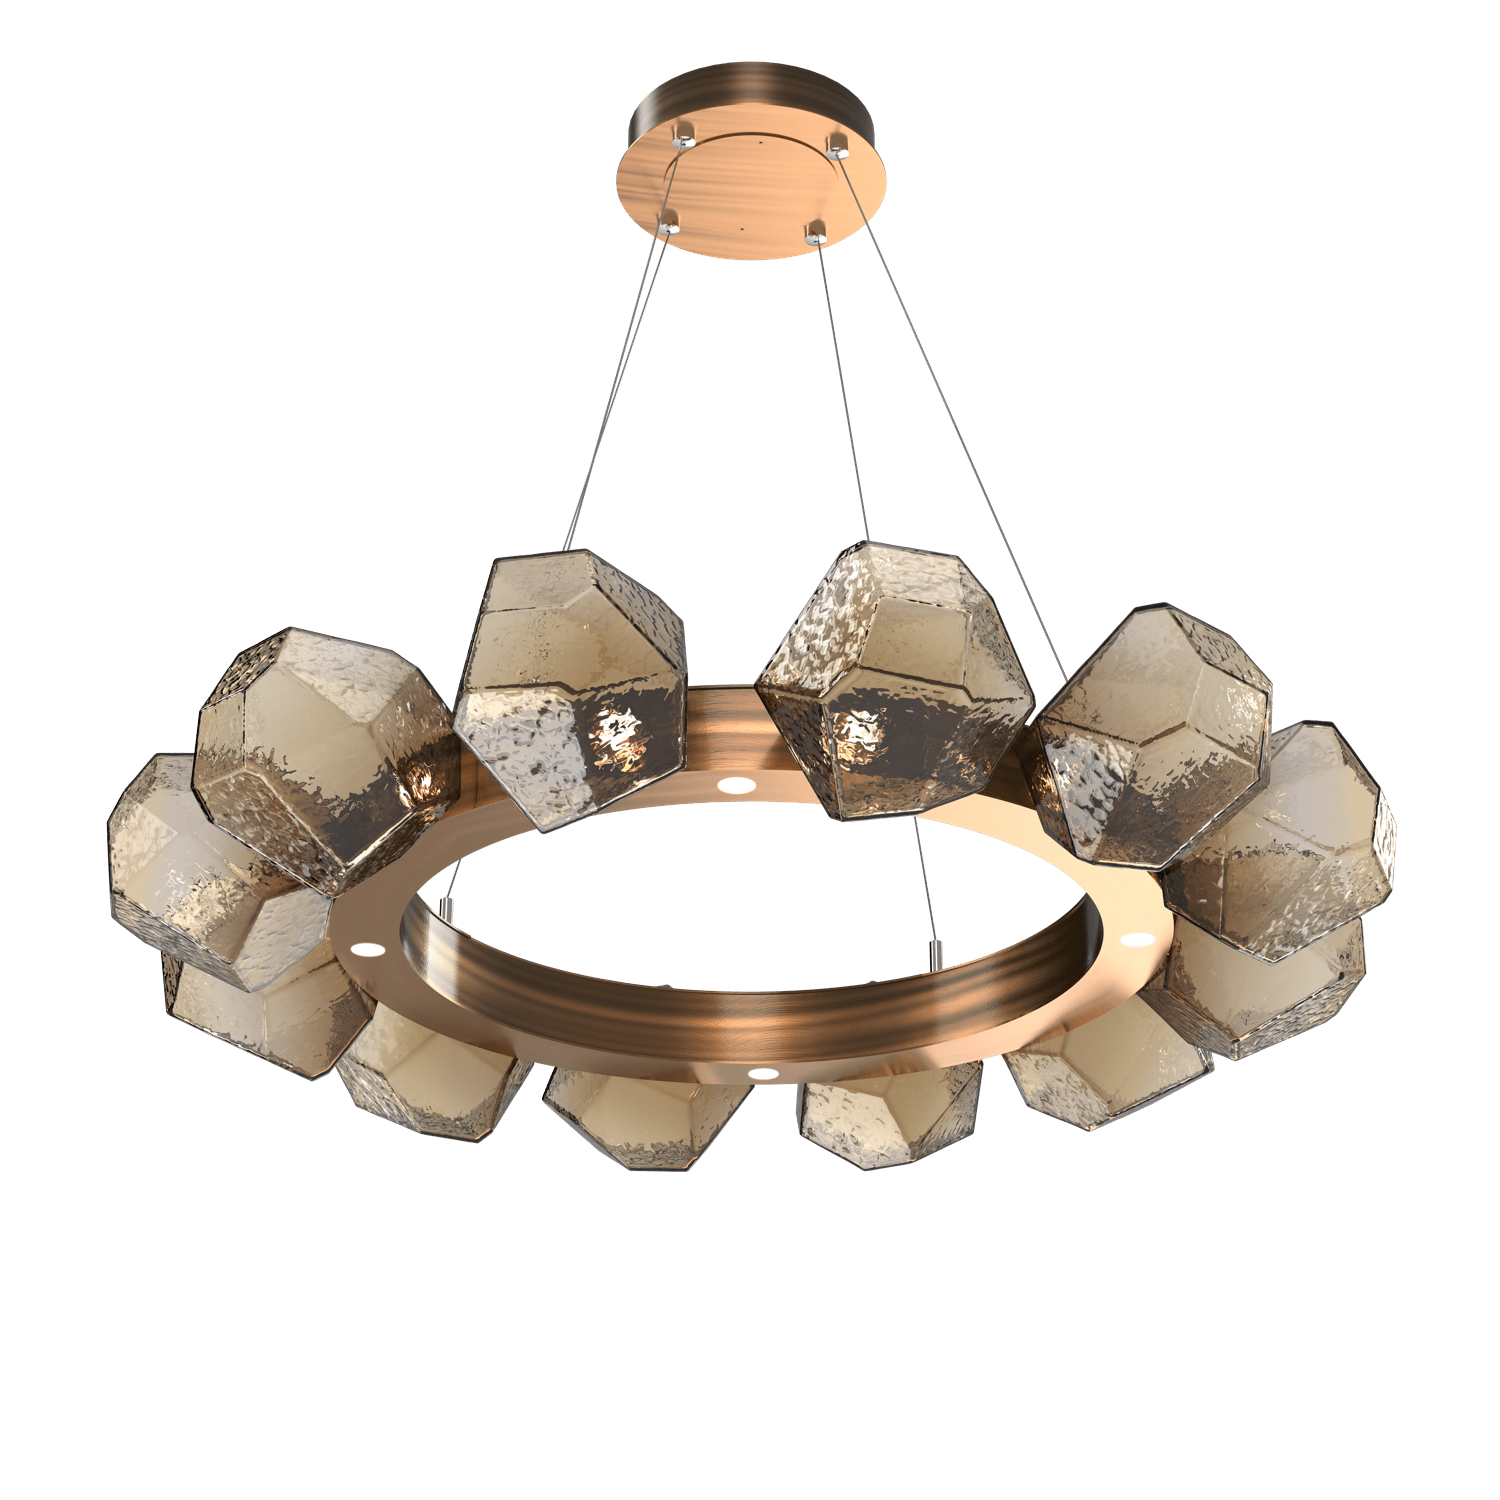 CHB0039-36-RB-B-Hammerton-Studio-Gem-36-inch-radial-ring-chandelier-with-oil-rubbed-bronze-finish-and-bronze-blown-glass-shades-and-LED-lamping